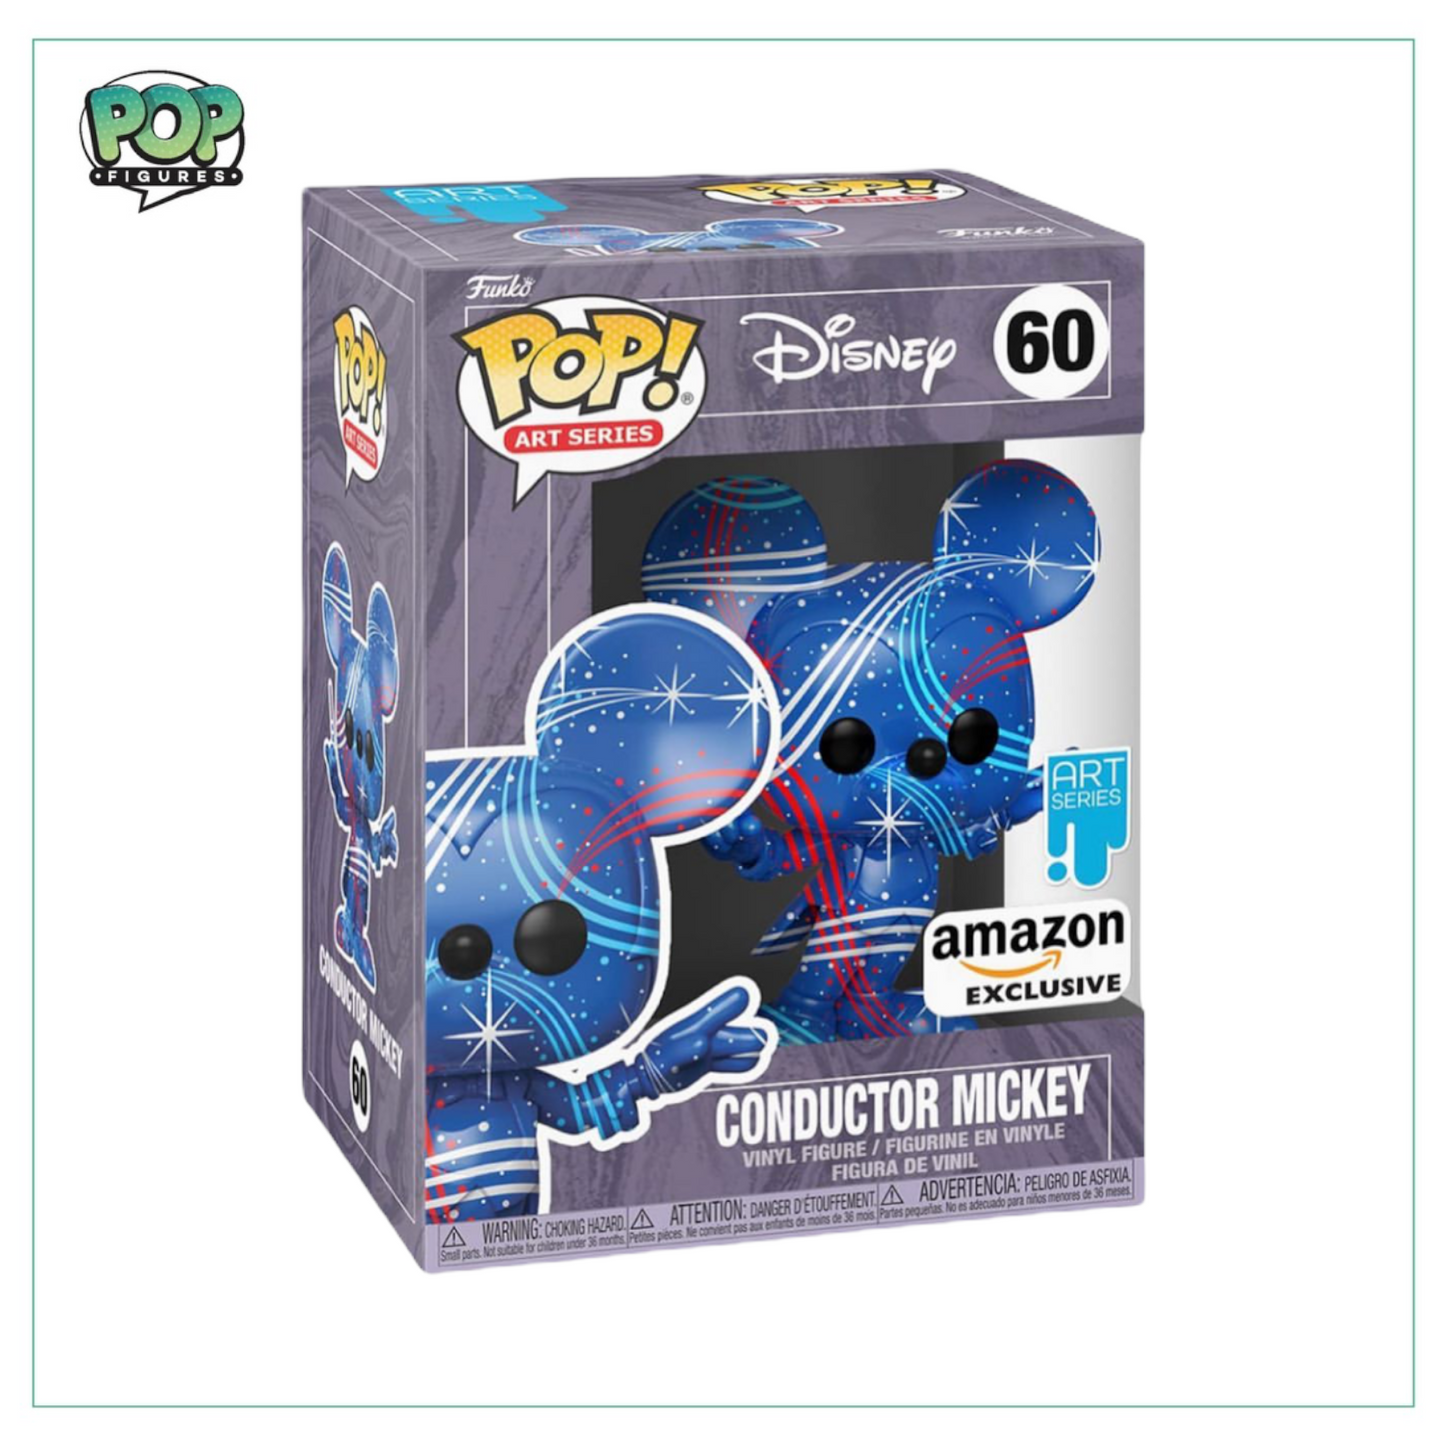 Conductor Mickey (Artist Series) #60 Funko Pop! - Disney - Amazon Exclusive - Angry Cat